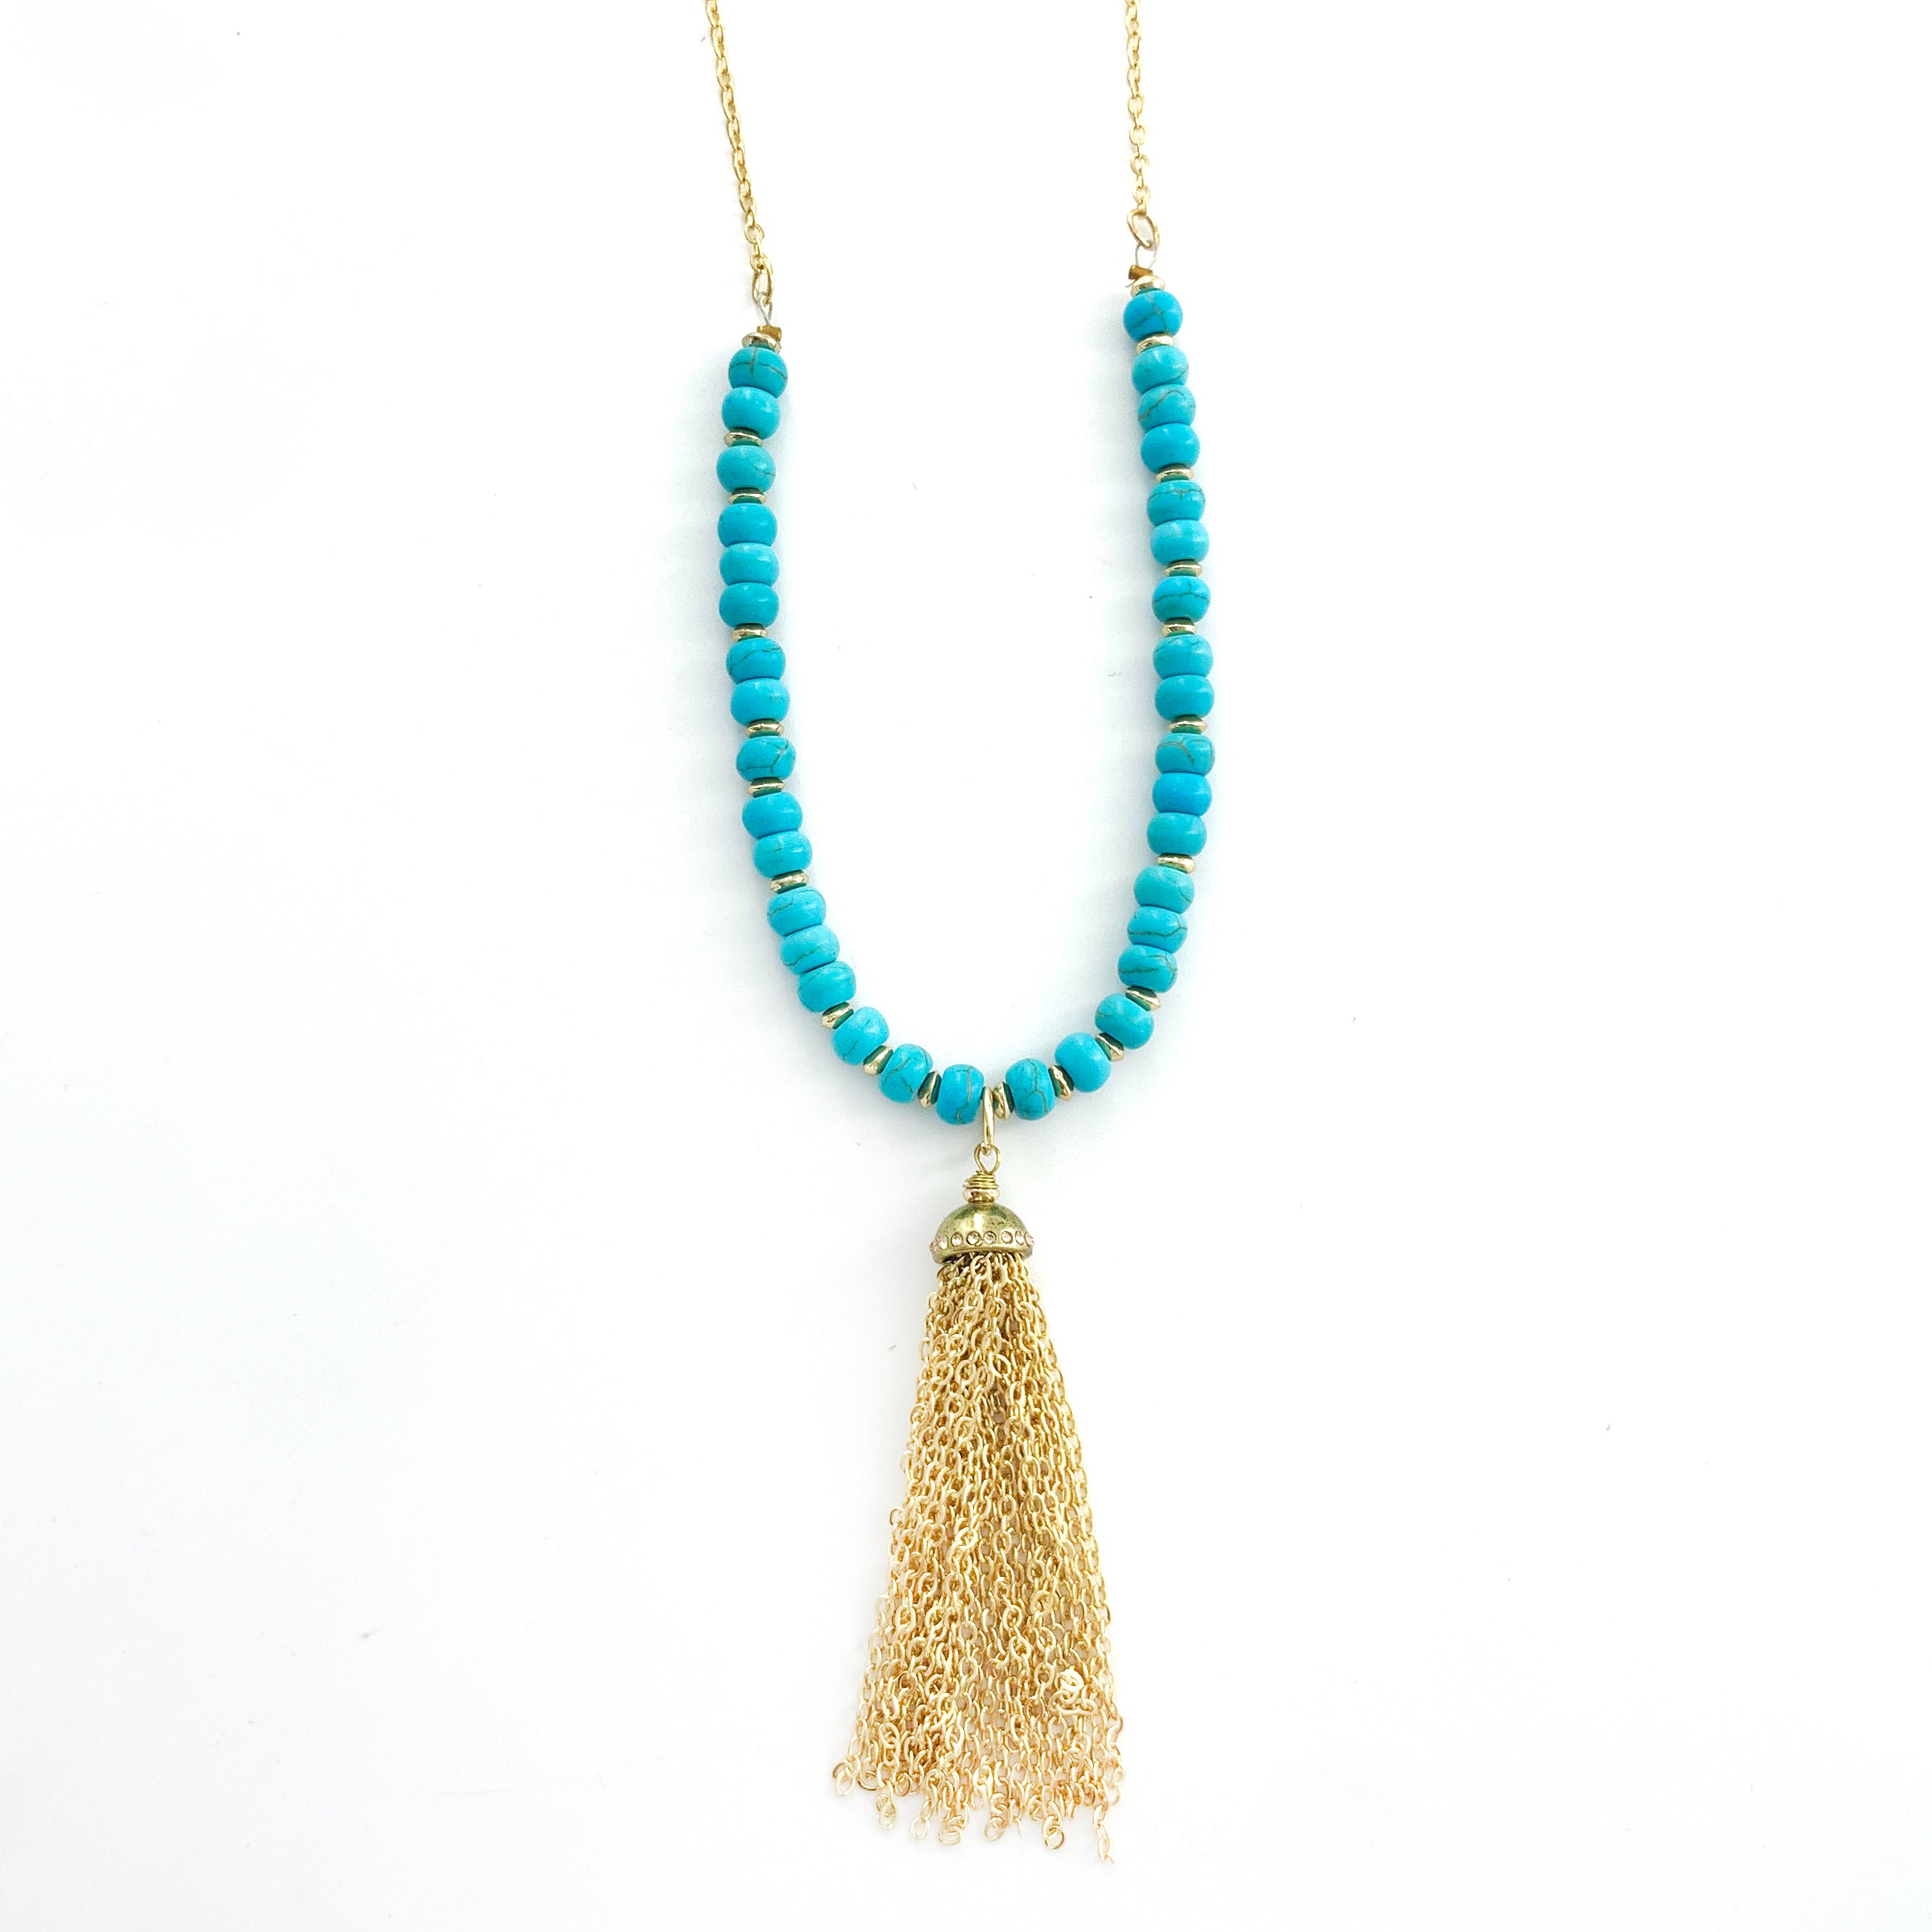 Turquoise Beads and Gold Tassel on Gold Chain